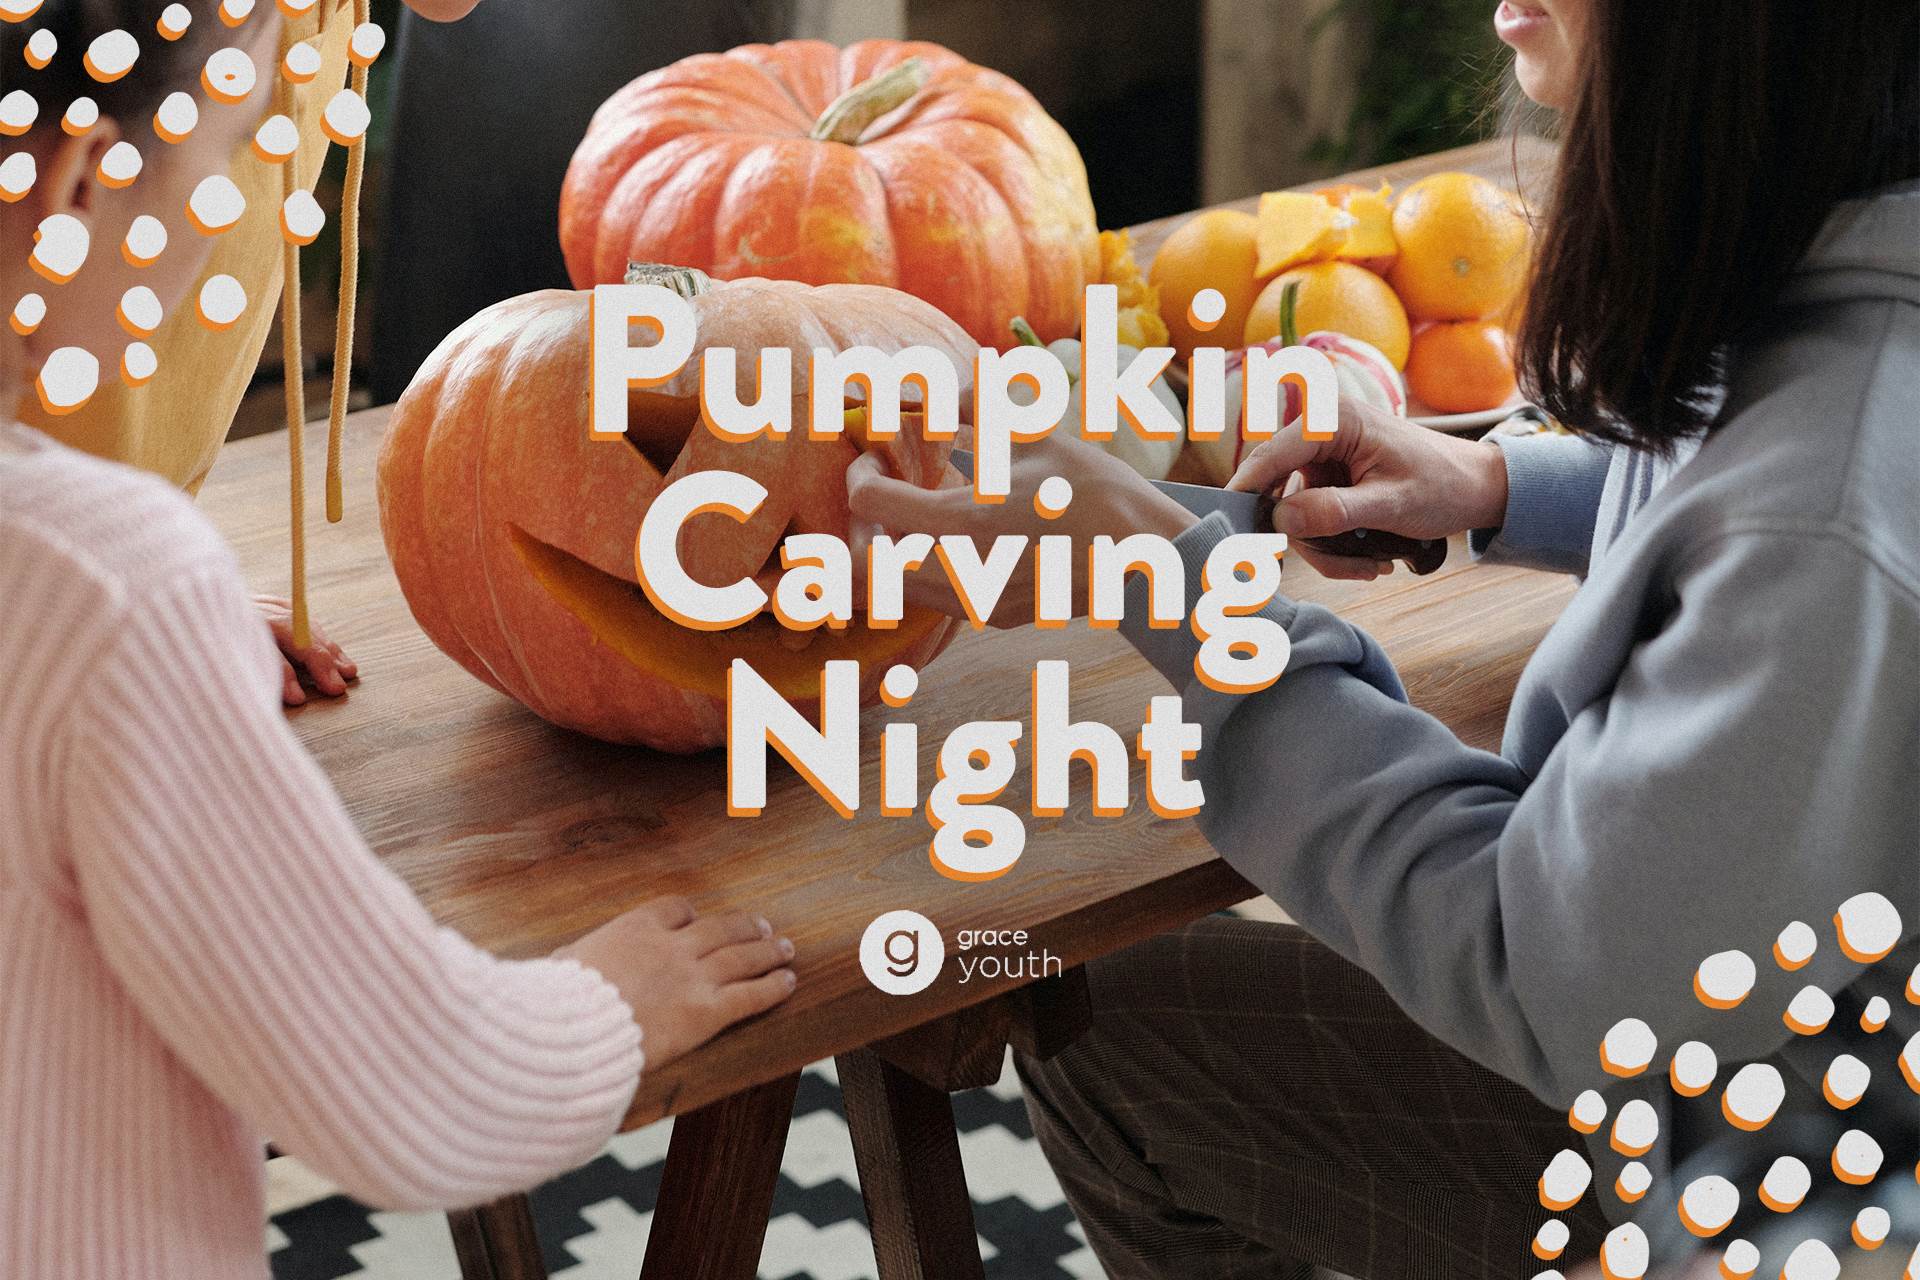 Link to Pumpkin Carving Night detail page